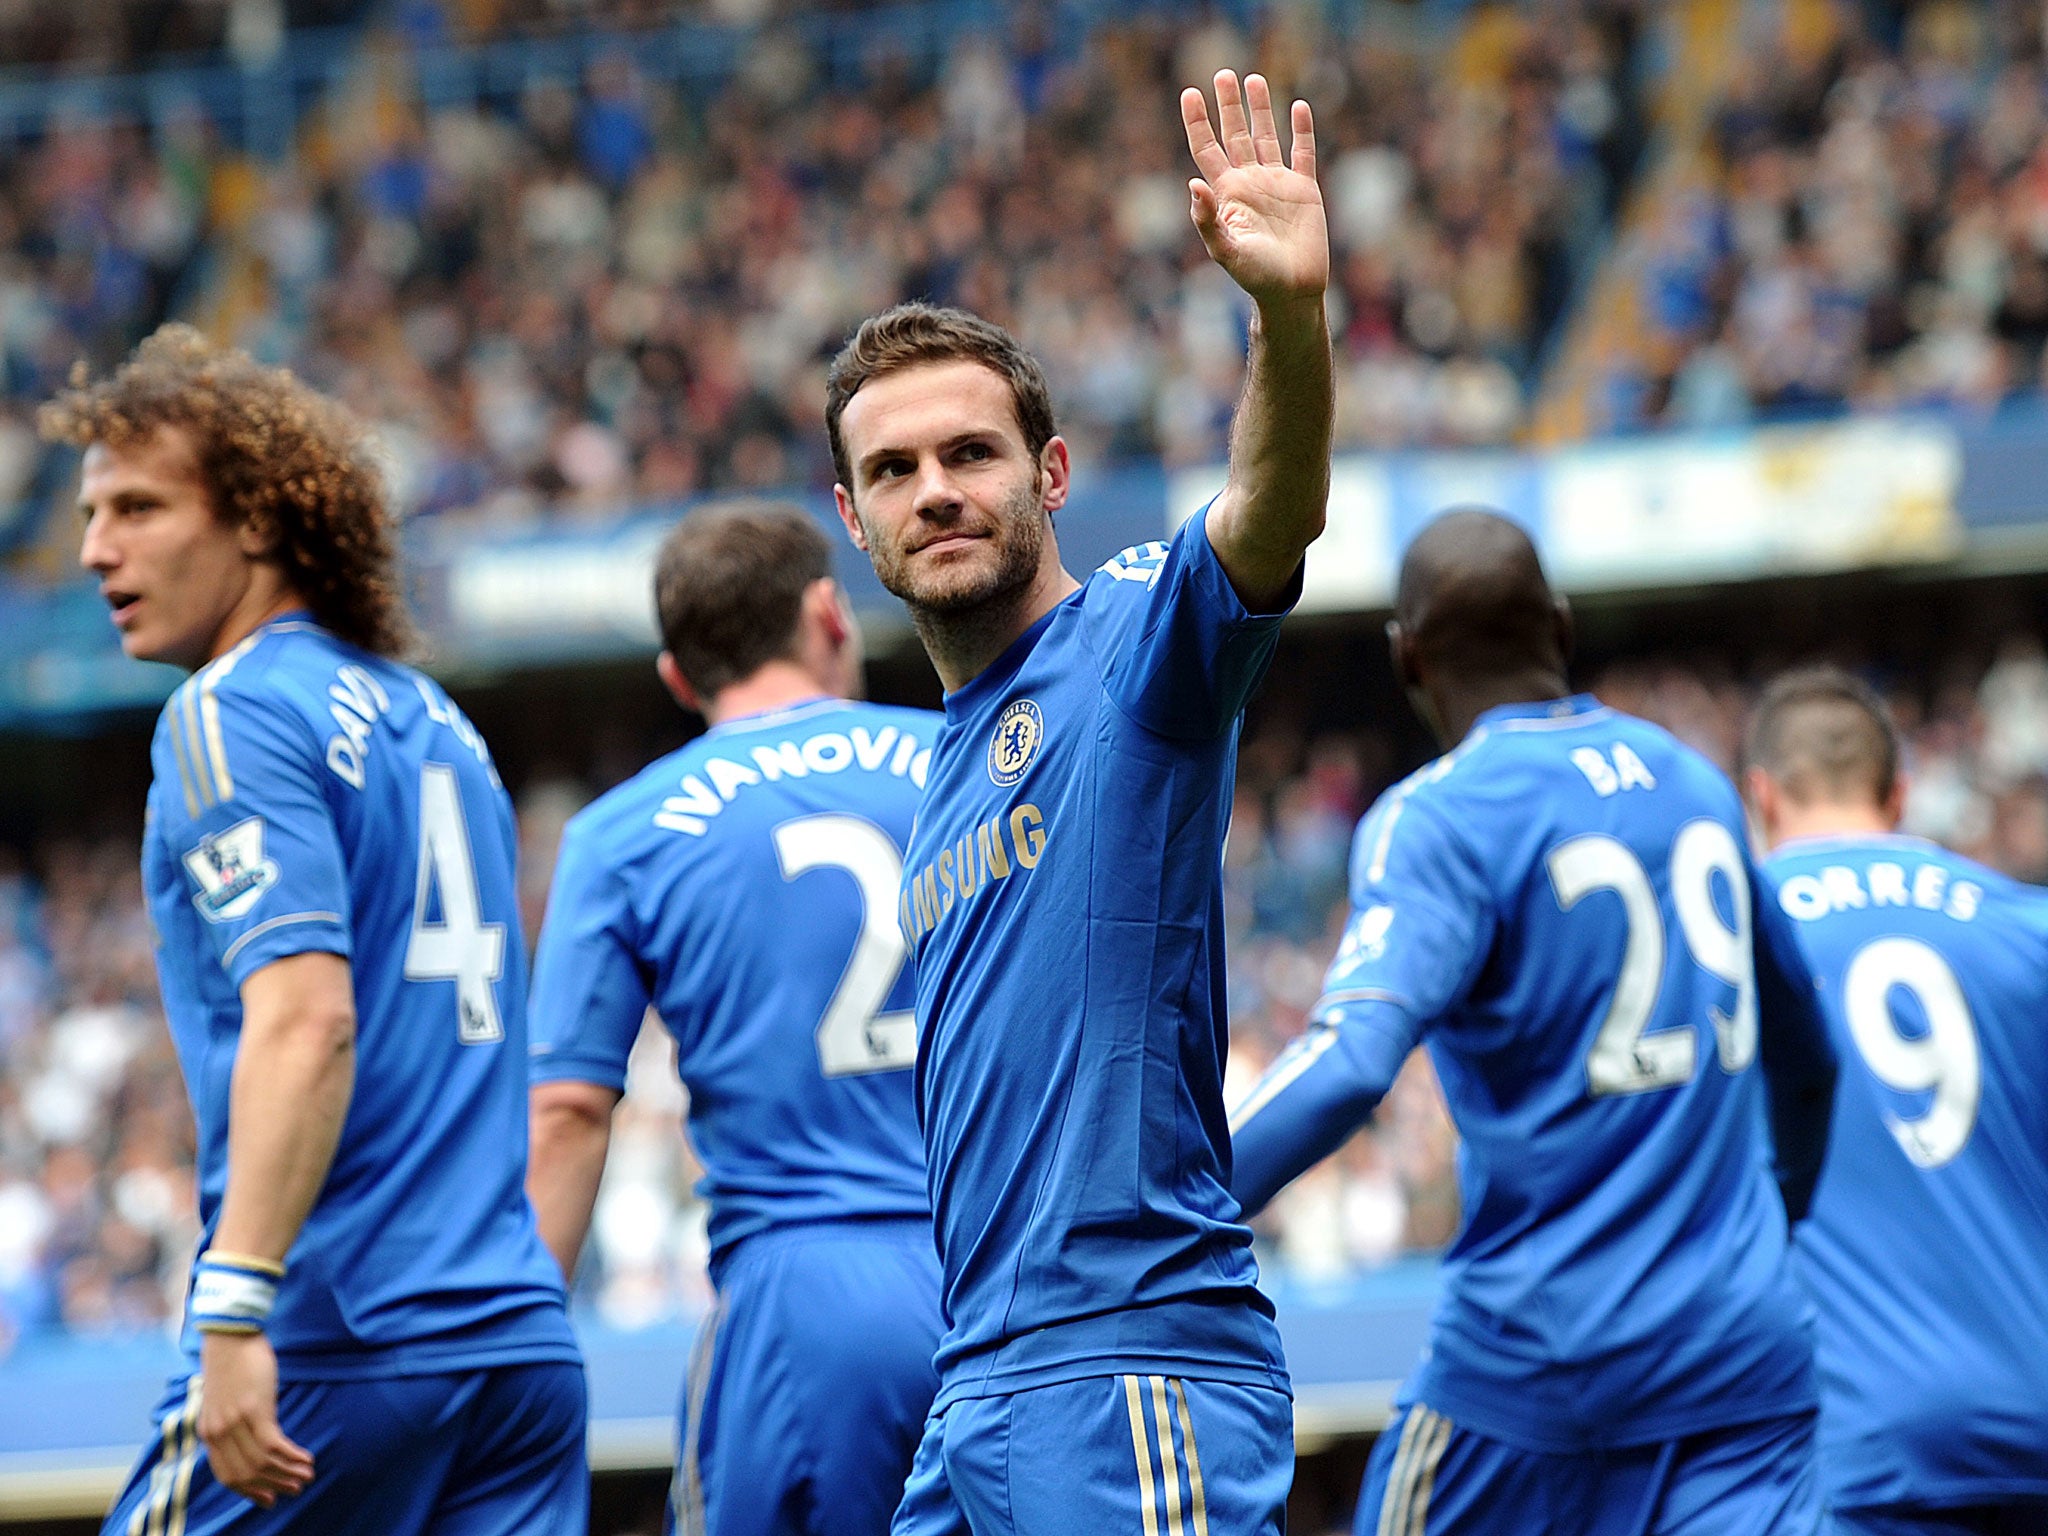 Juan Mata says goodbye to Chelsea as a deal is finally reacher for his transfer to Manchester United